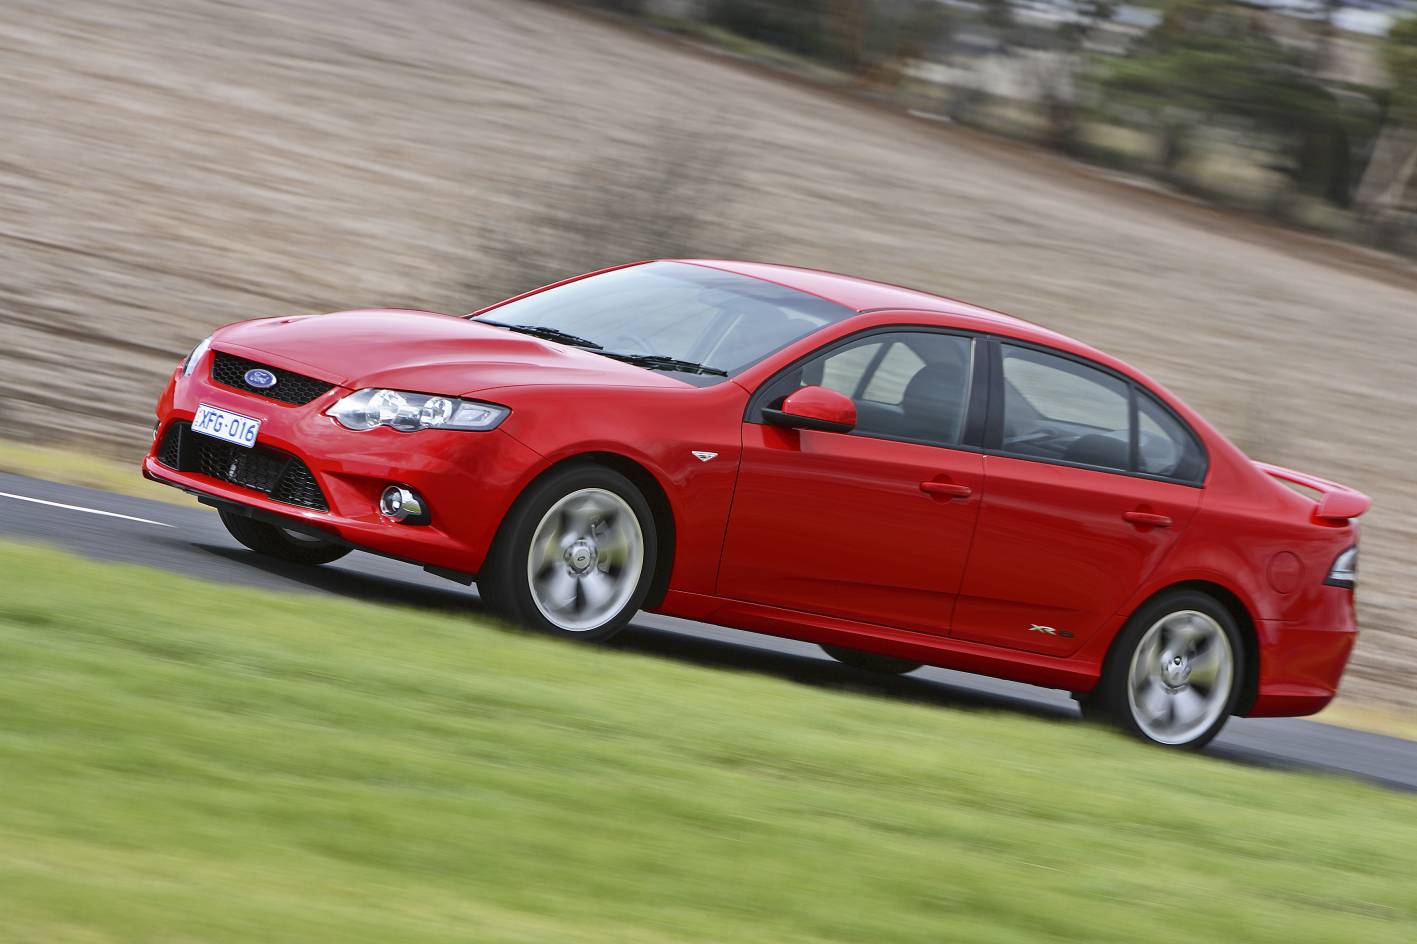 Ford Falcon XR8 FG photos, picture 12. size: 1417x944. 